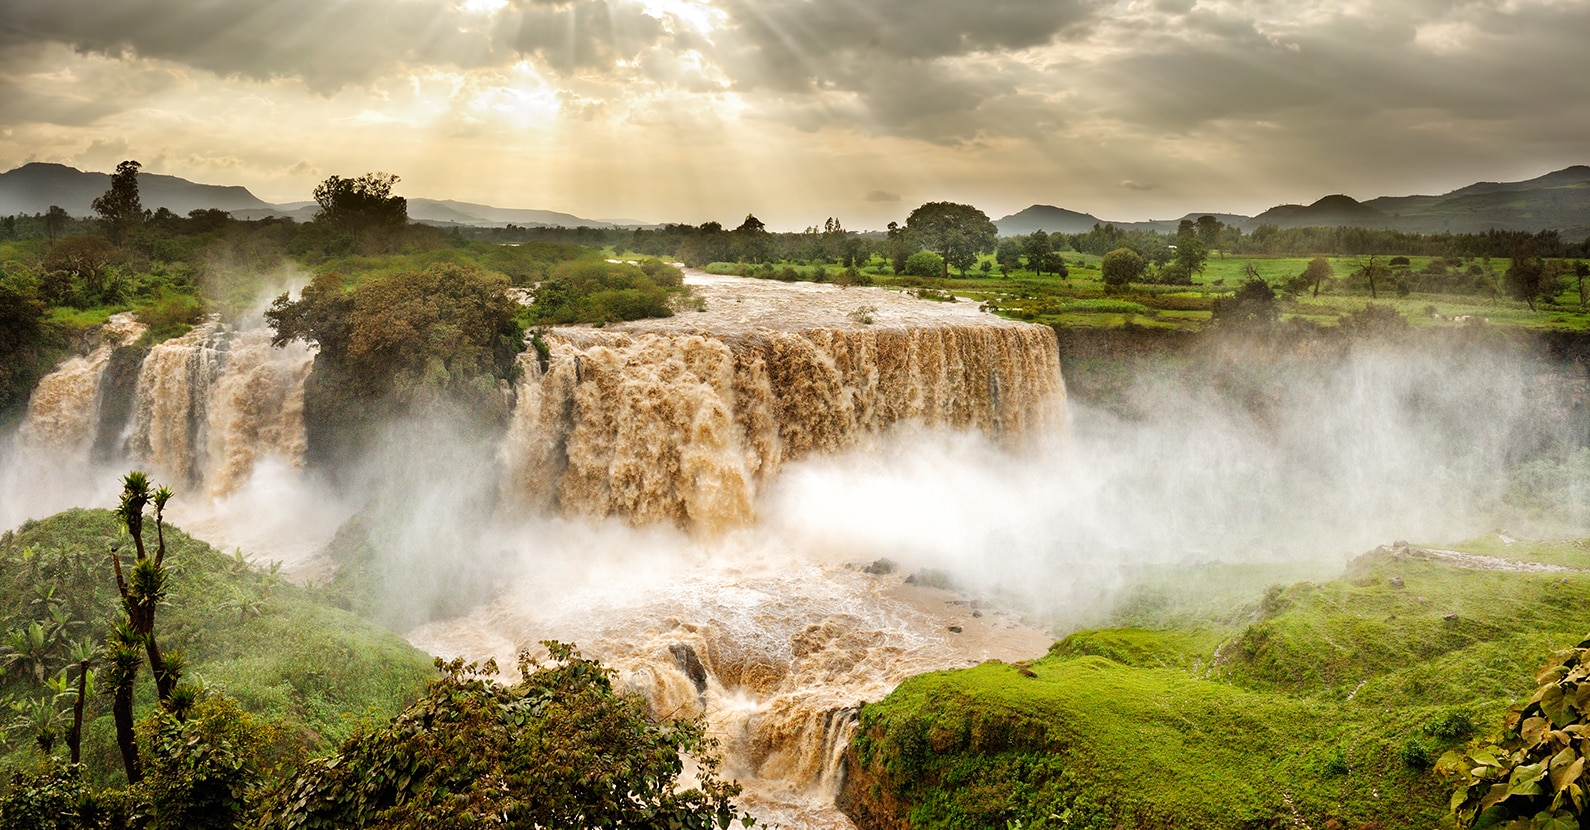 The crashing waters of the Blue Nile Falls